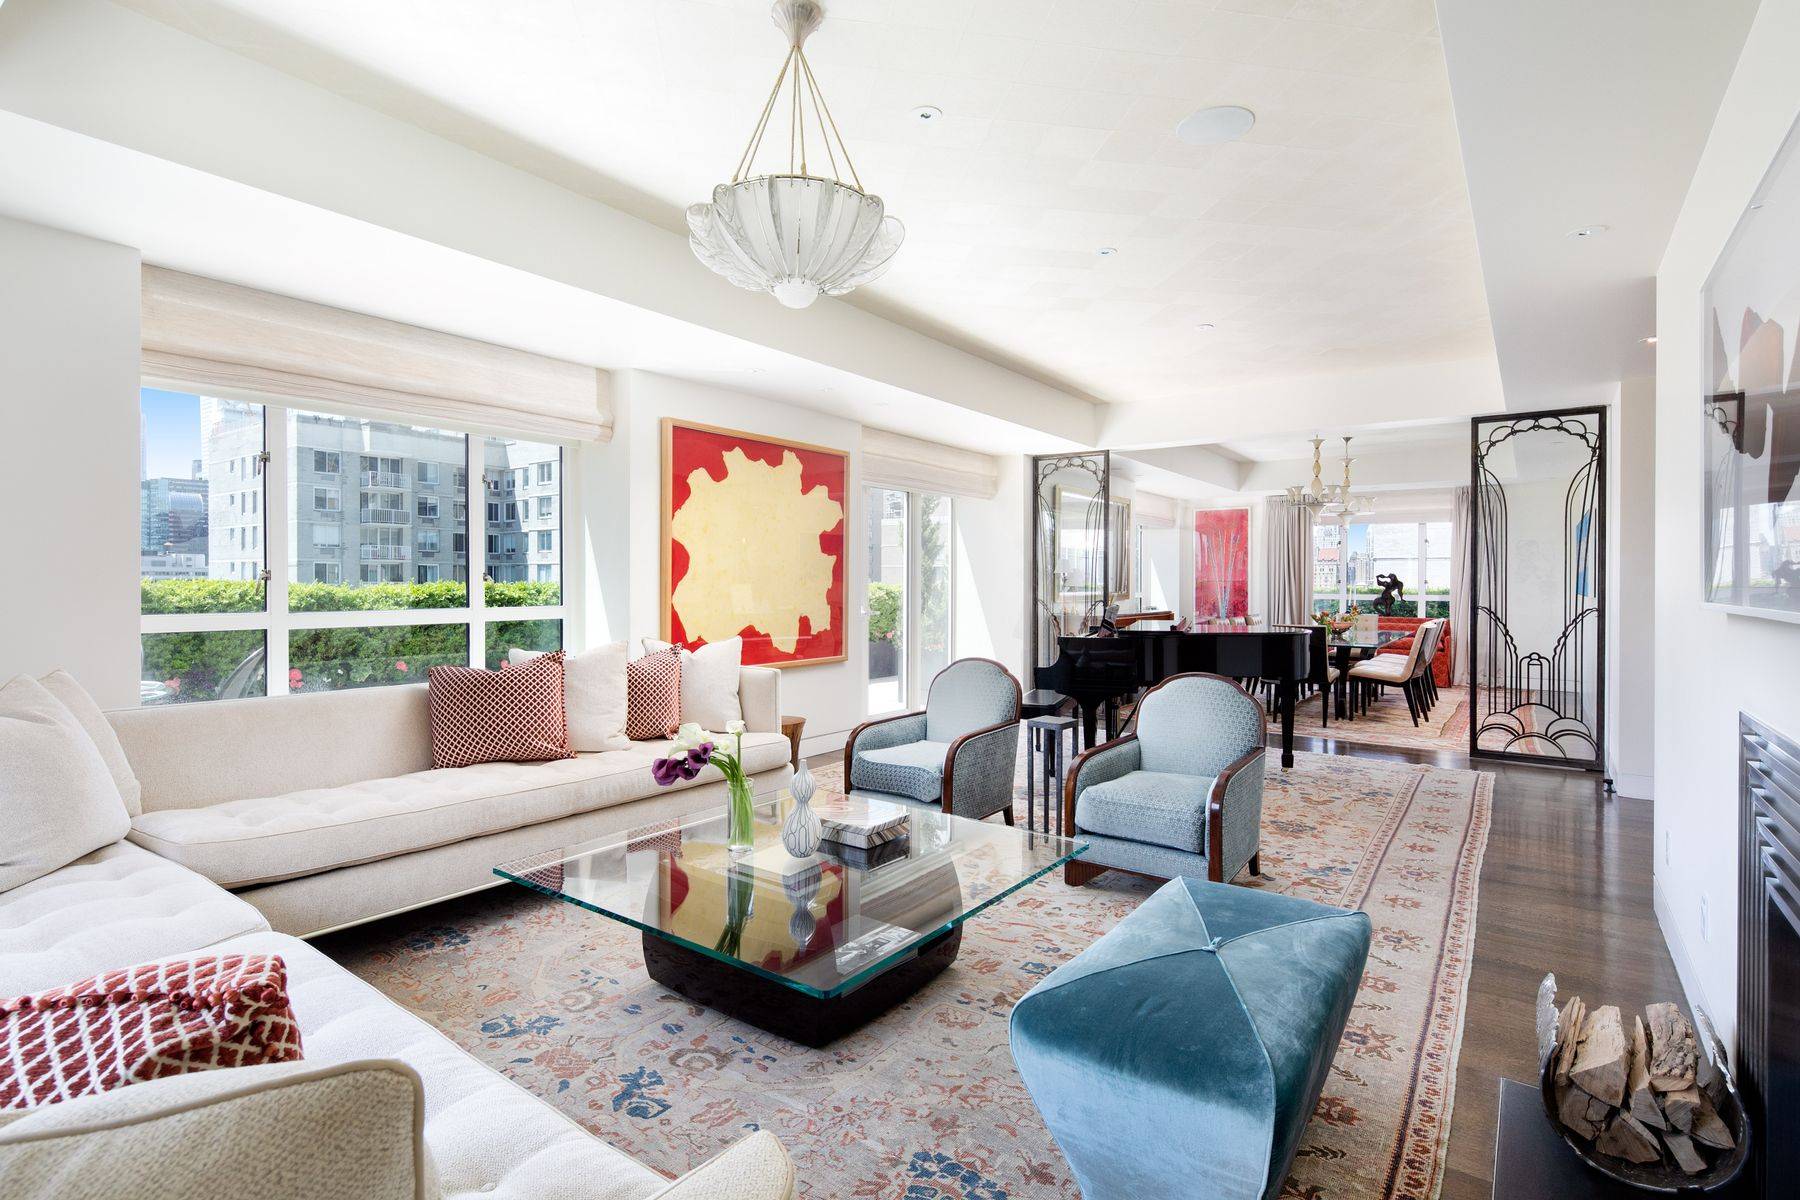 The landmark Manhattan House captures the spirit of living beautifully in one of the world's most sophisticated cities.